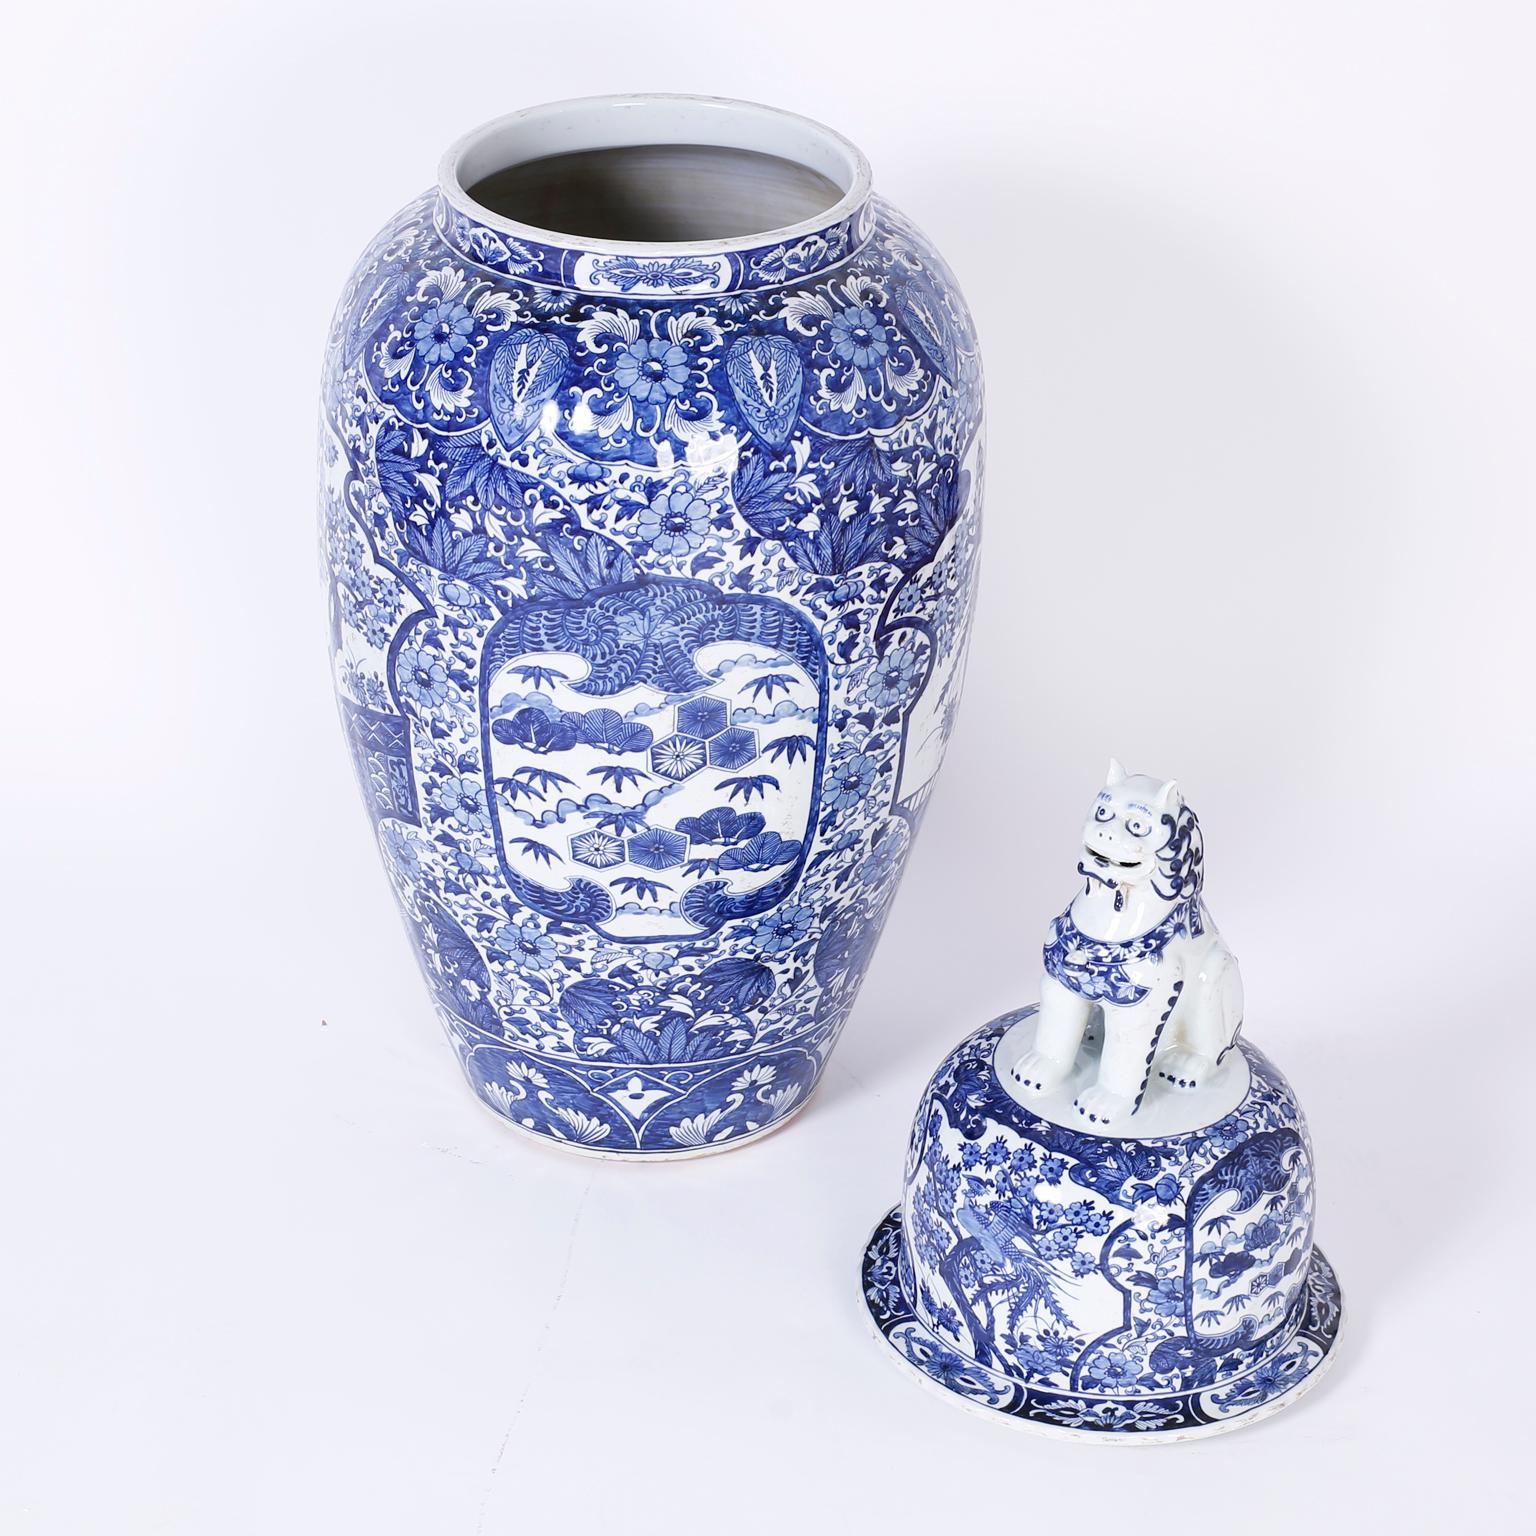 Contemporary Large Pair of Chinese Blue and White Porcelain Jars or Palace Urns